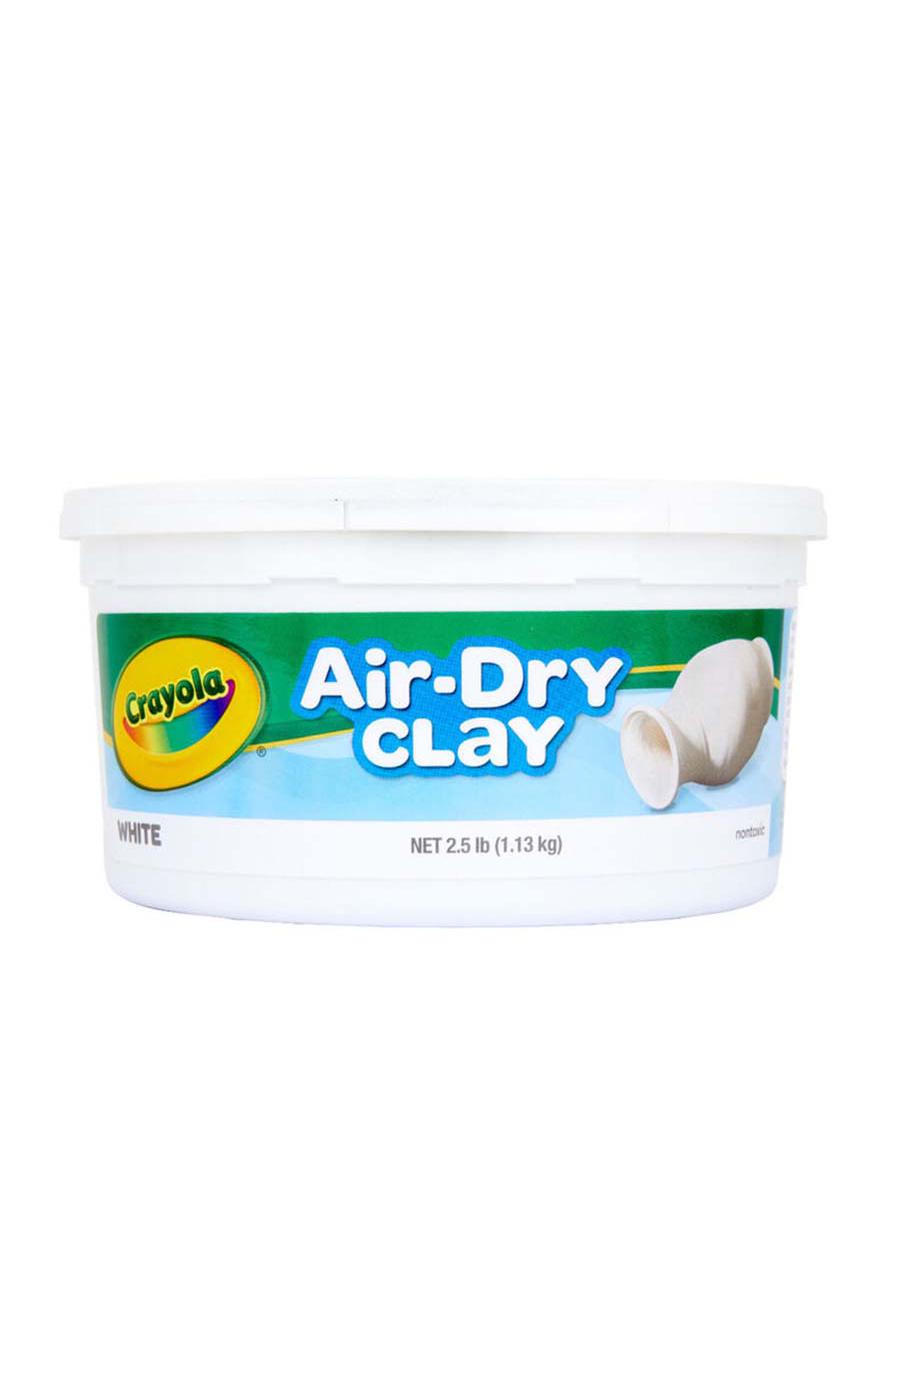 Crayola Air-Dry Clay - White; image 1 of 3